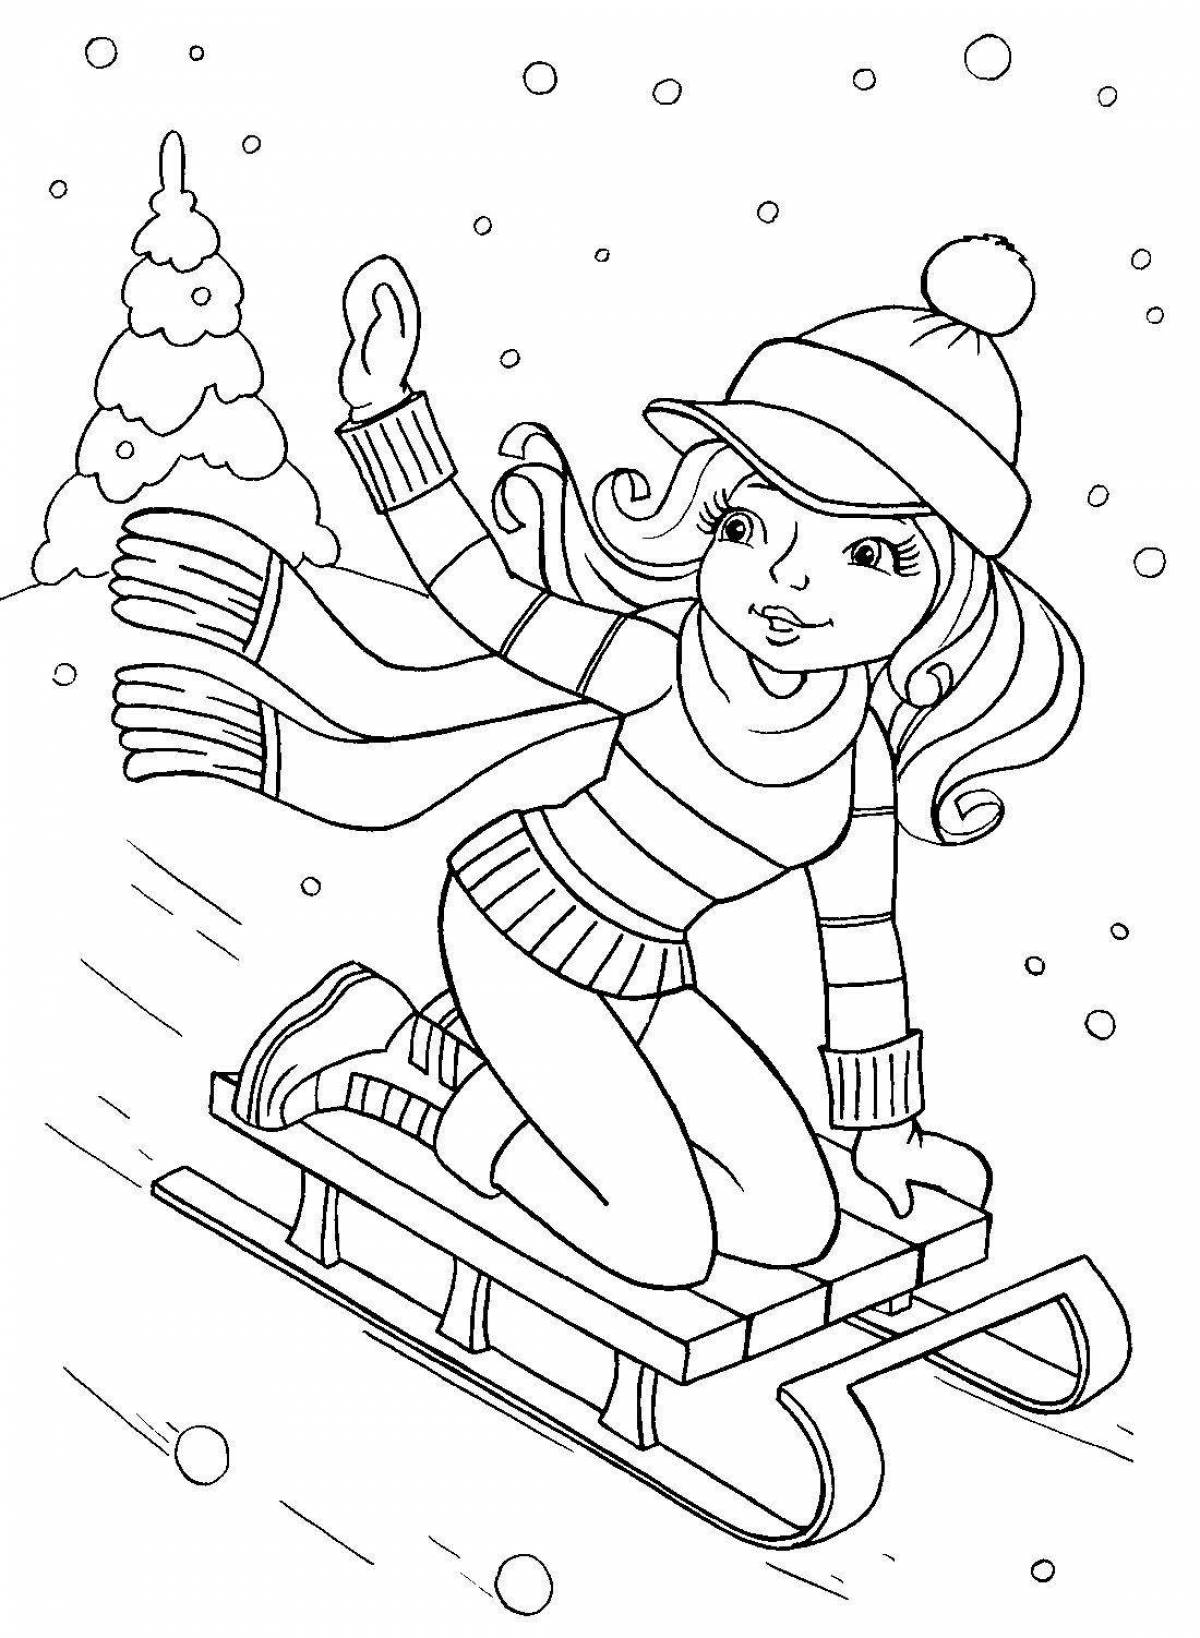 Elegant coloring for winter sports on a dhow